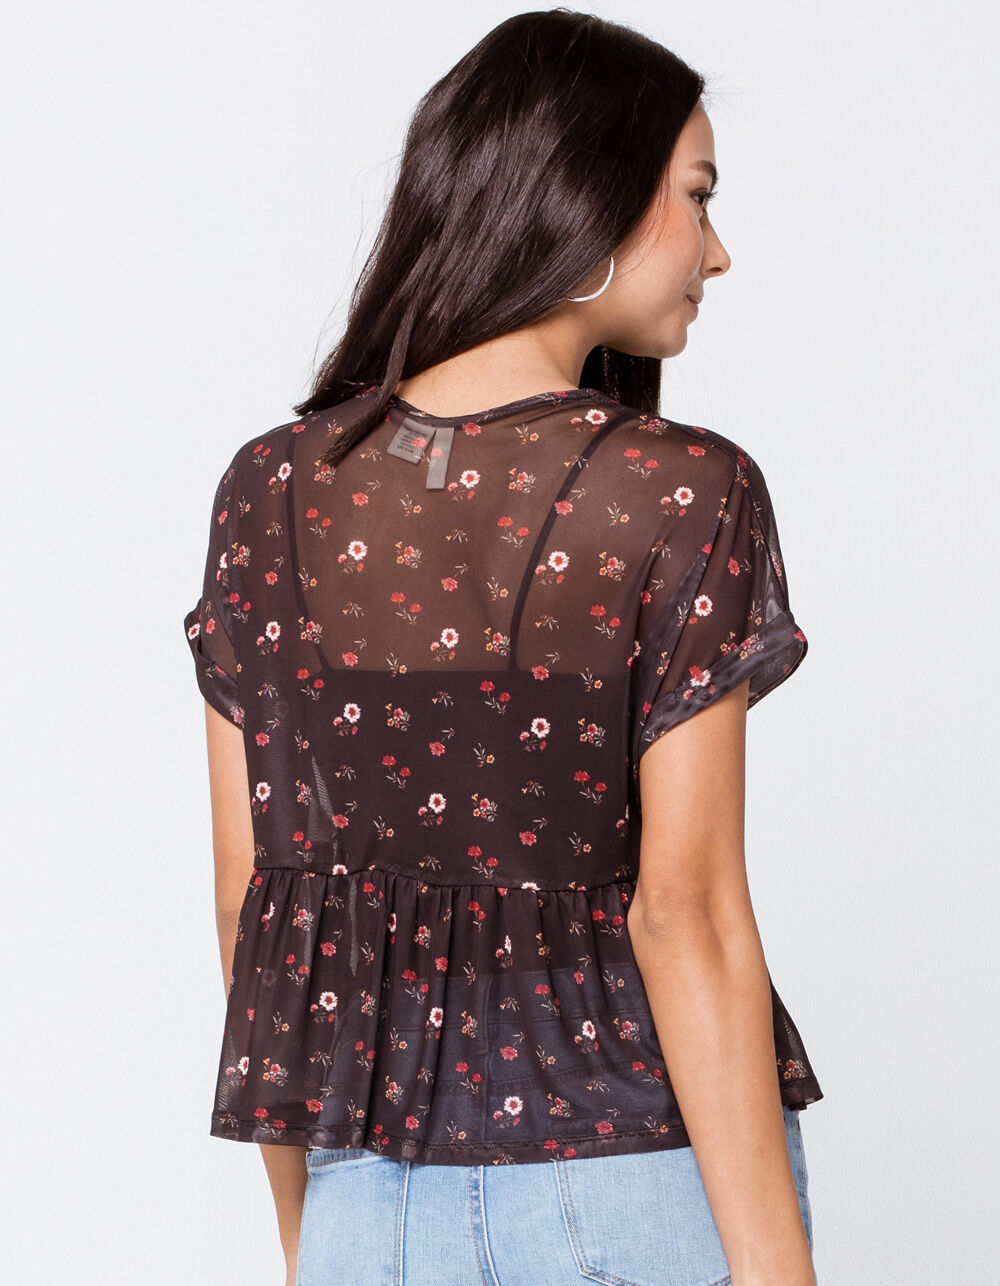 SKY AND SPARROW Ditsy Mesh Womens Babydoll Top - BLACK COMBO | Tillys